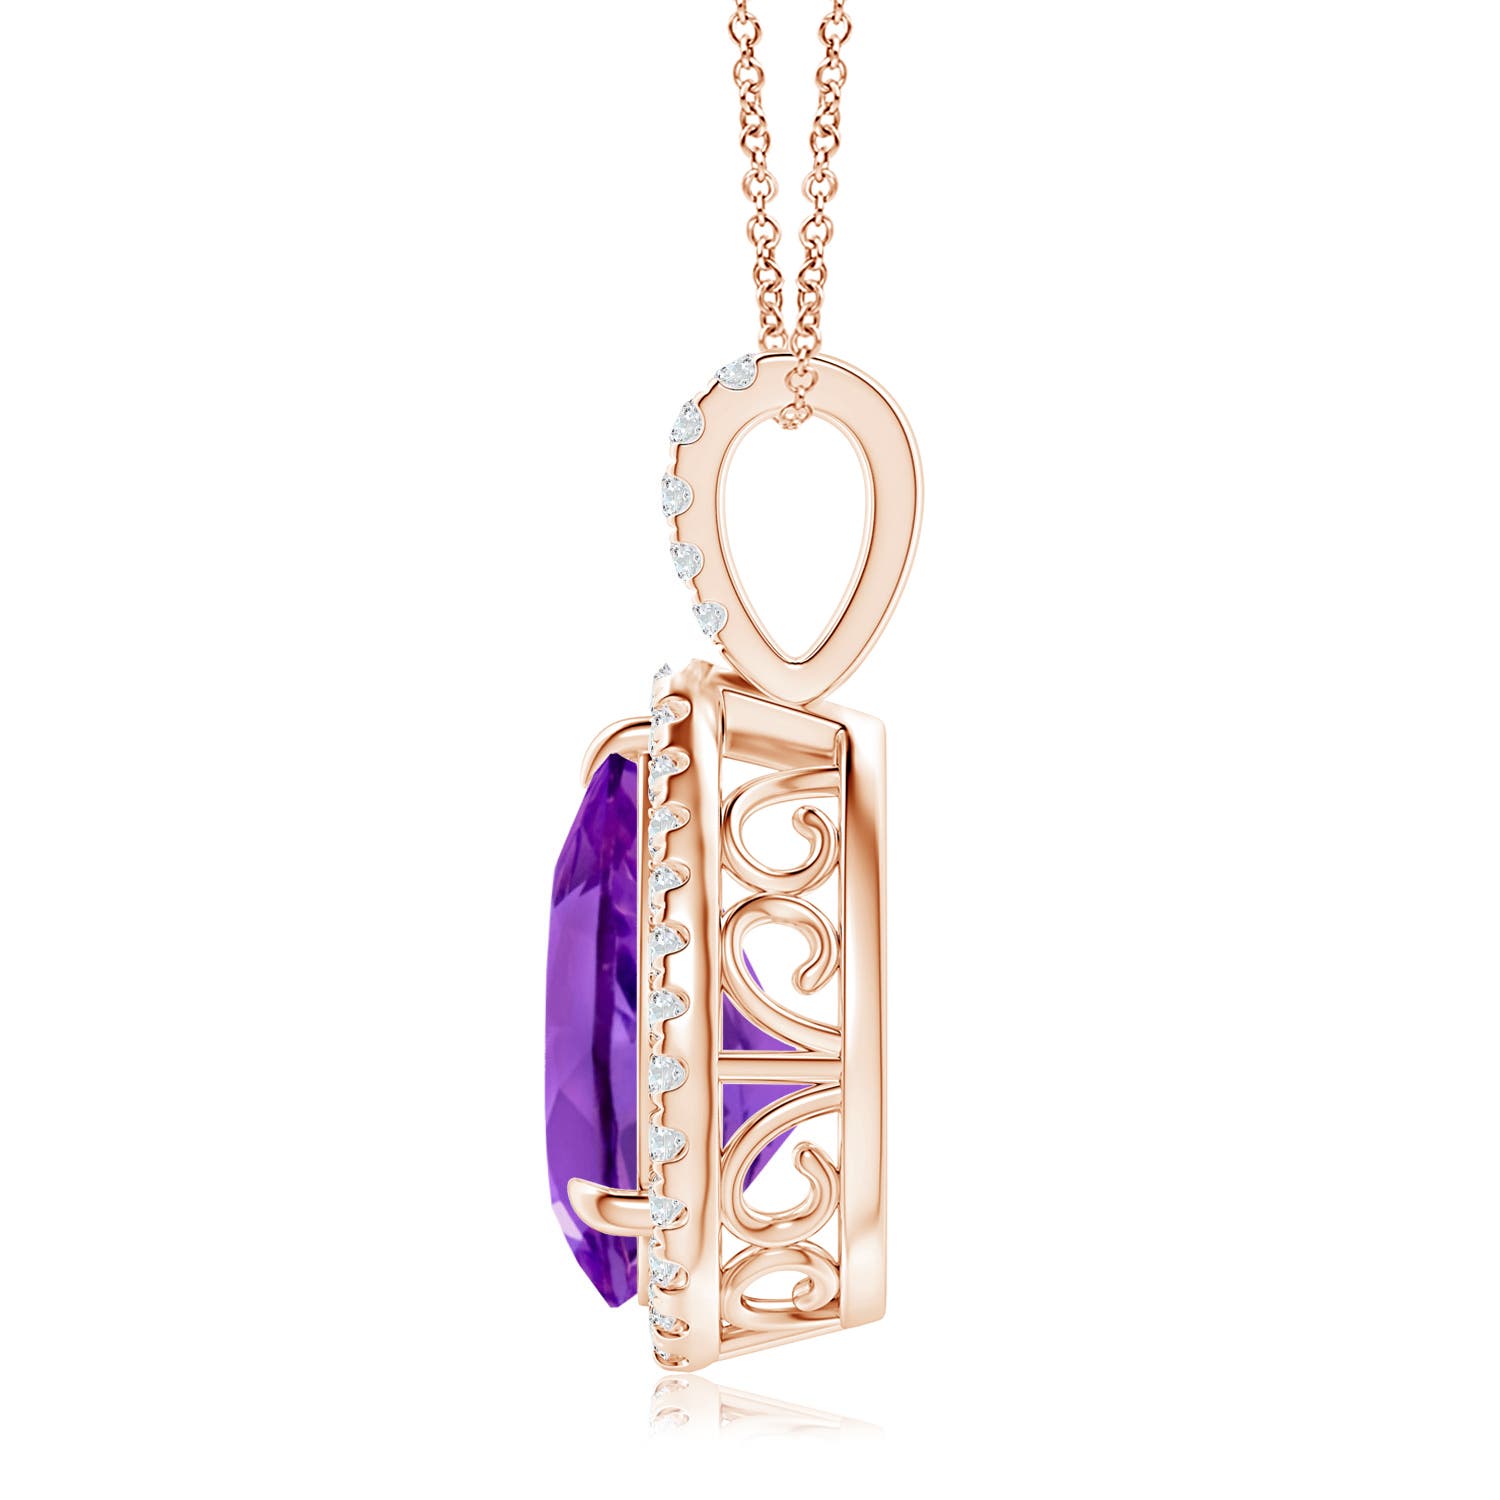 AAA - Amethyst / 2.85 CT / 14 KT Rose Gold